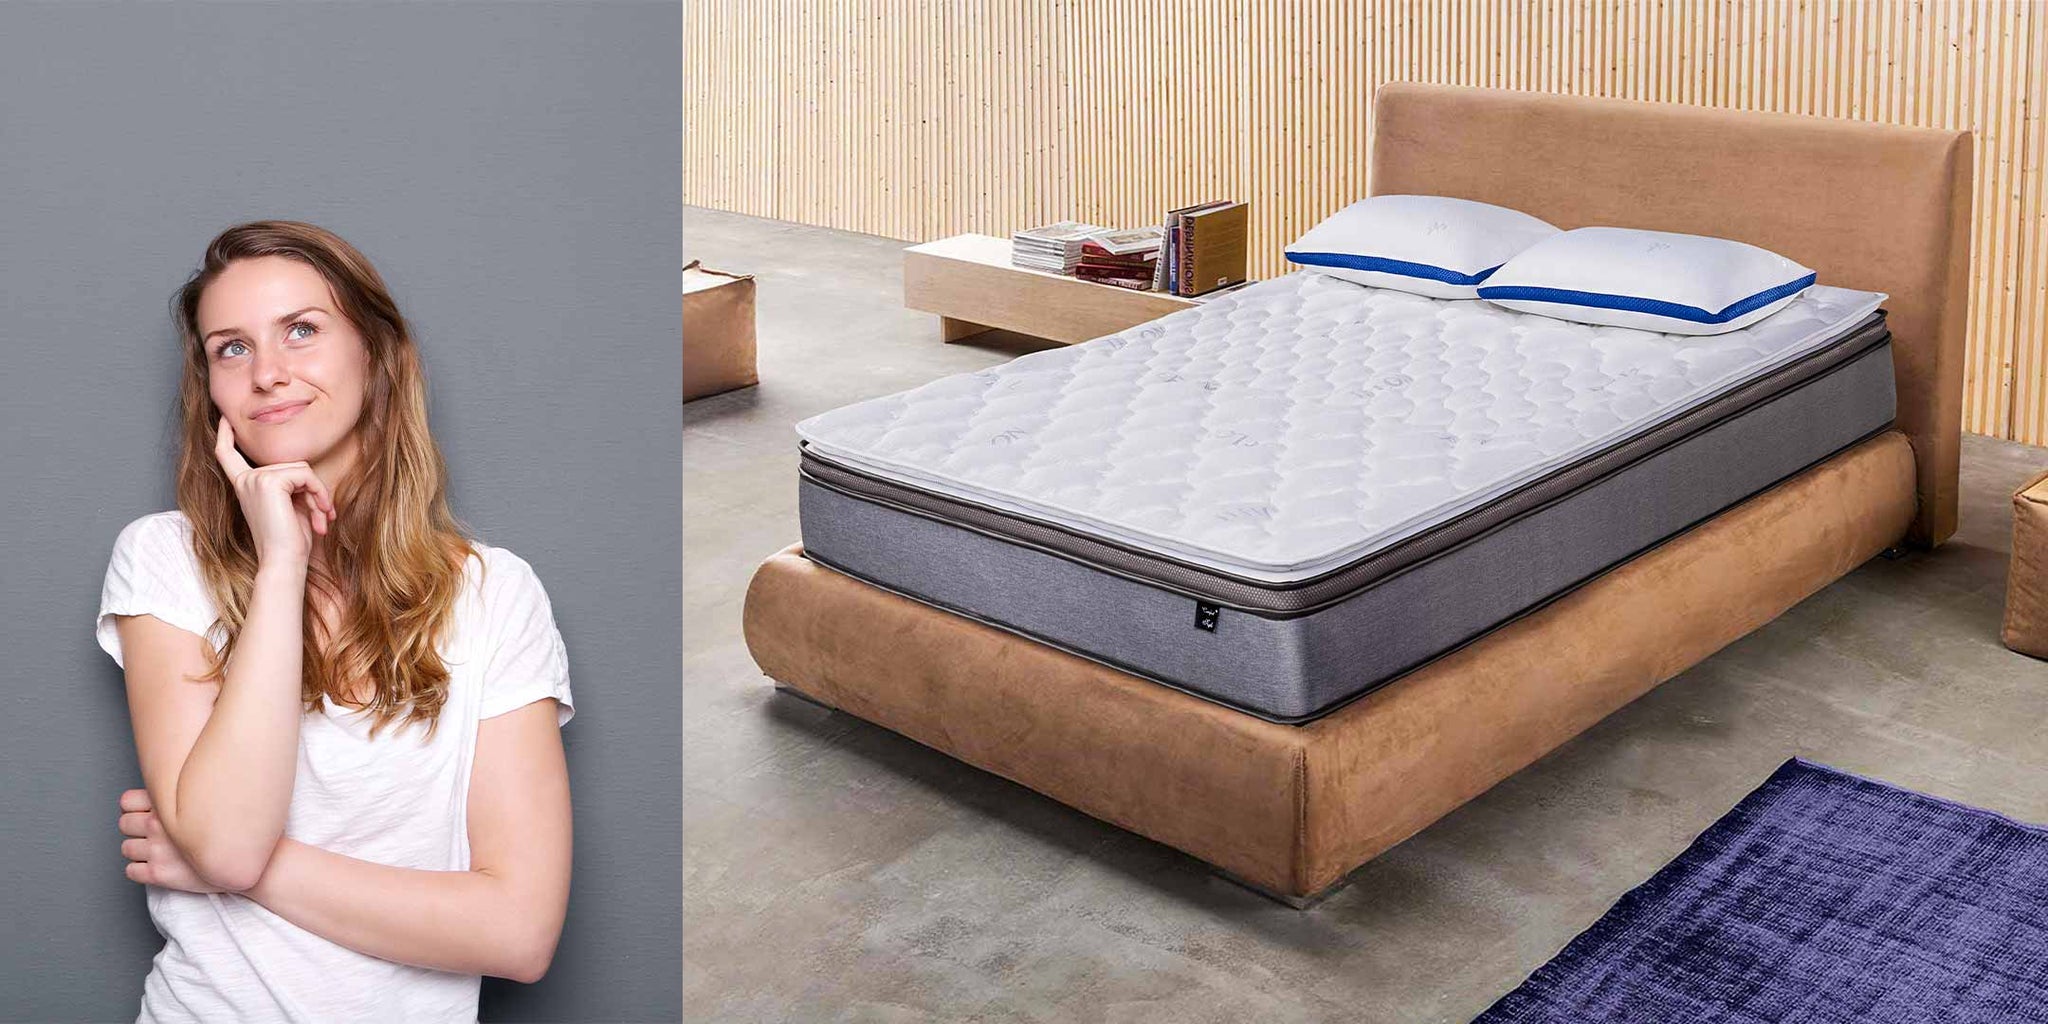 Buying Mattress with Preconceived Ideas